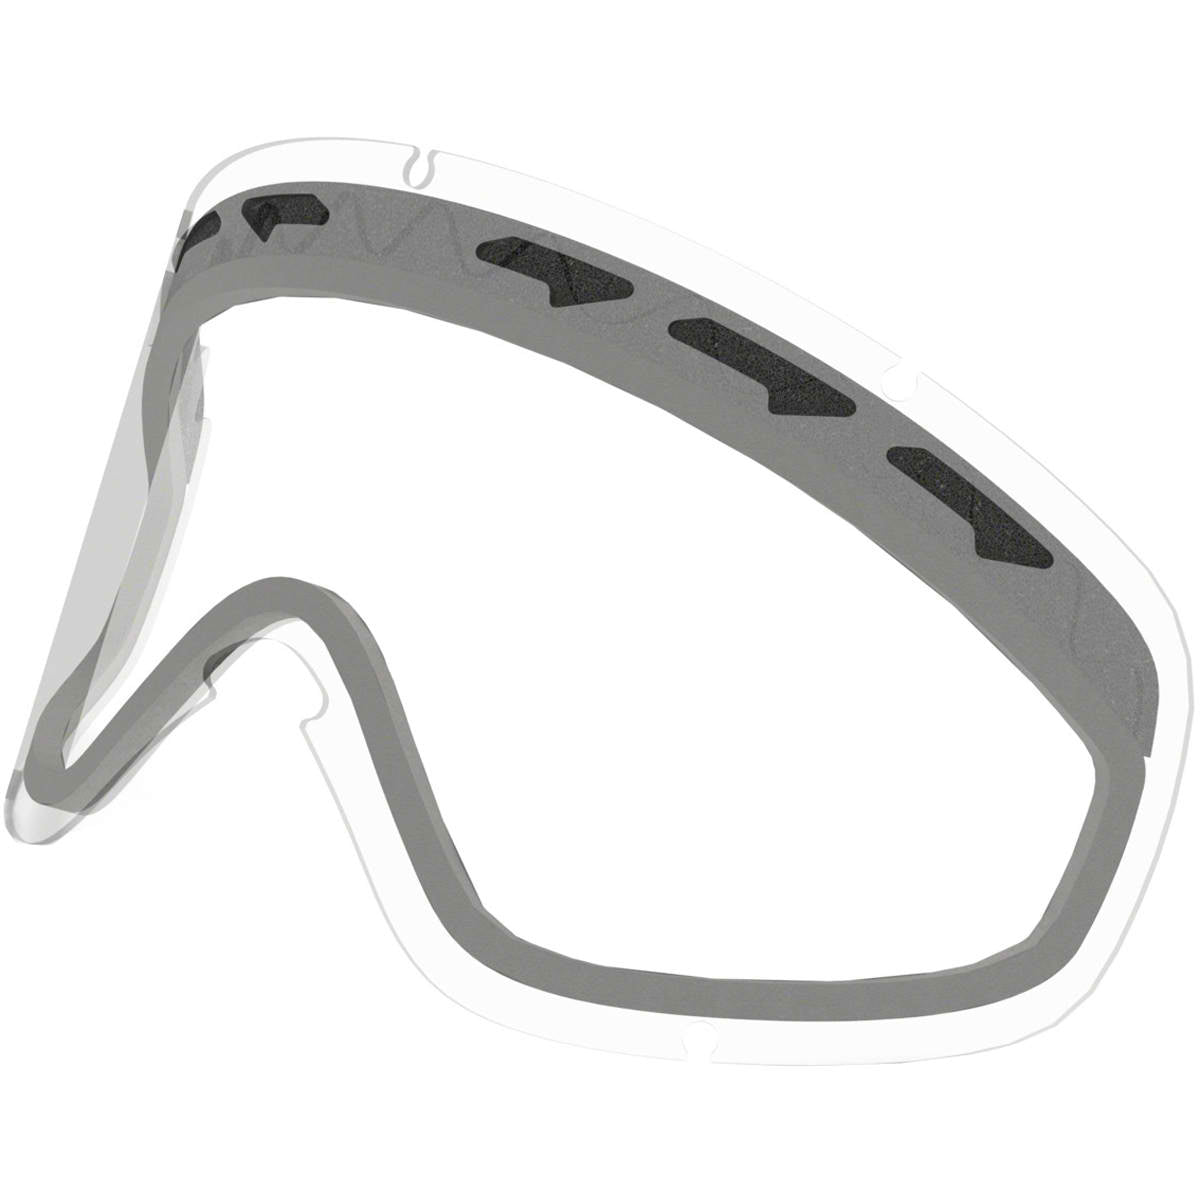 Oakley O2 XS Replacement Lens Goggles Accessories-59-258